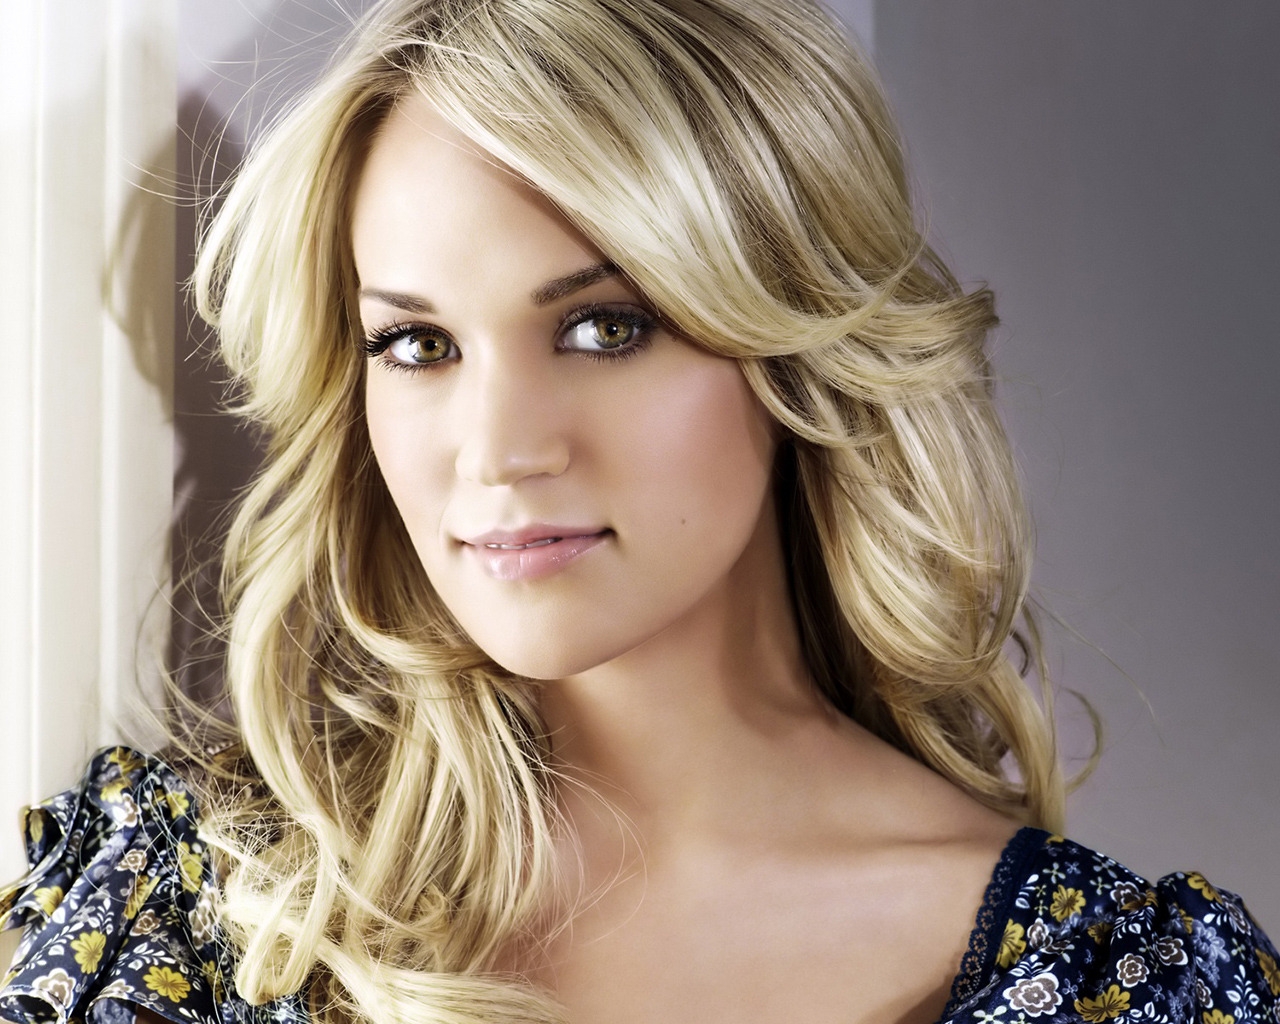 Amazing Carrie Underwood for 1280 x 1024 resolution